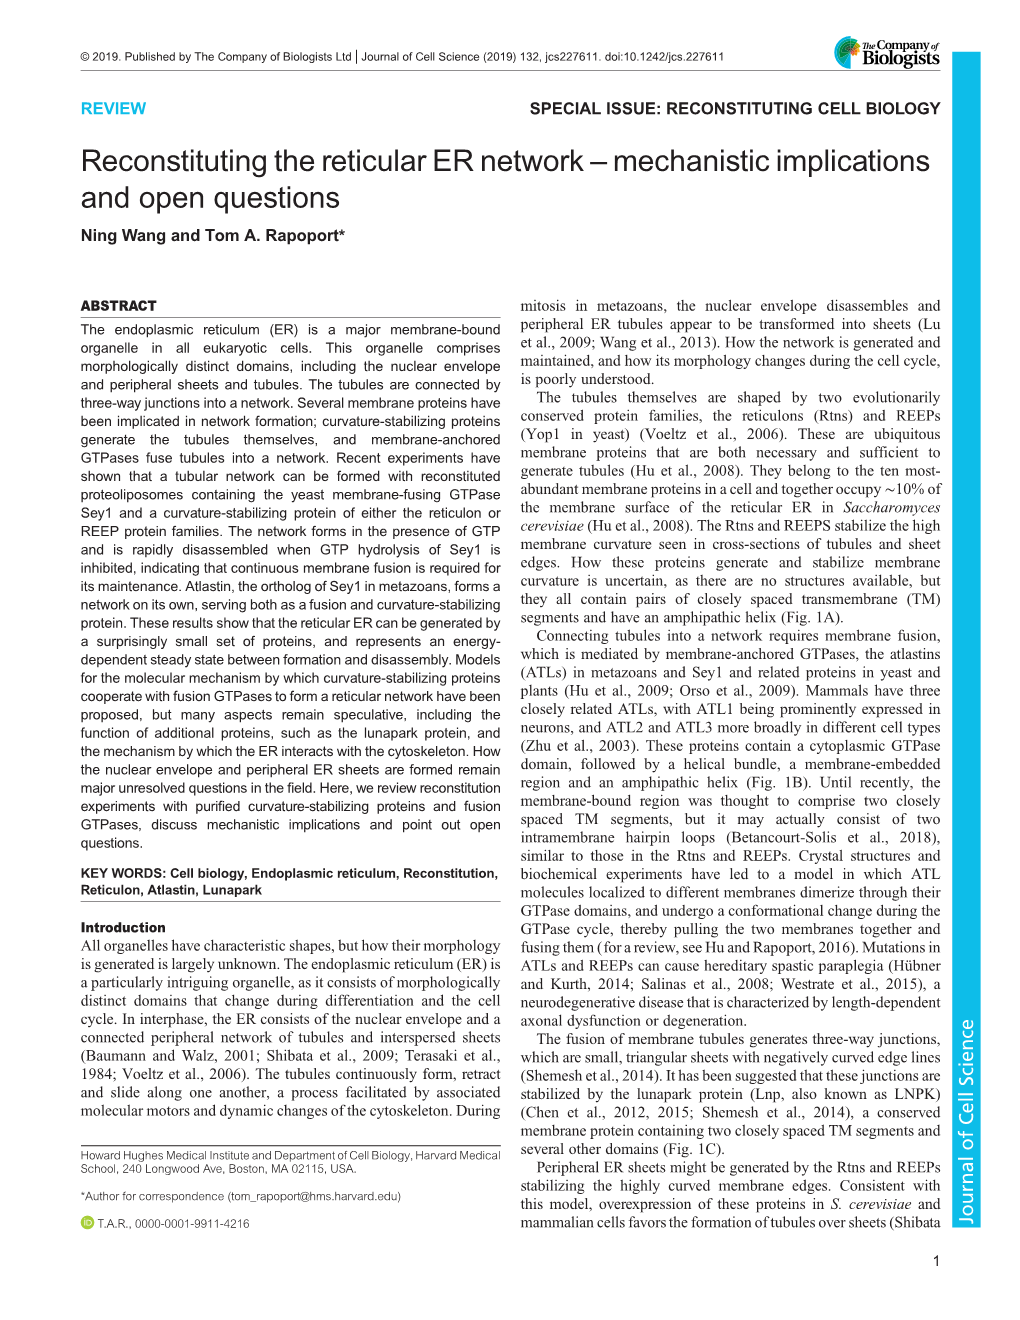 Reconstituting the Reticular ER Network – Mechanistic Implications and Open Questions Ning Wang and Tom A